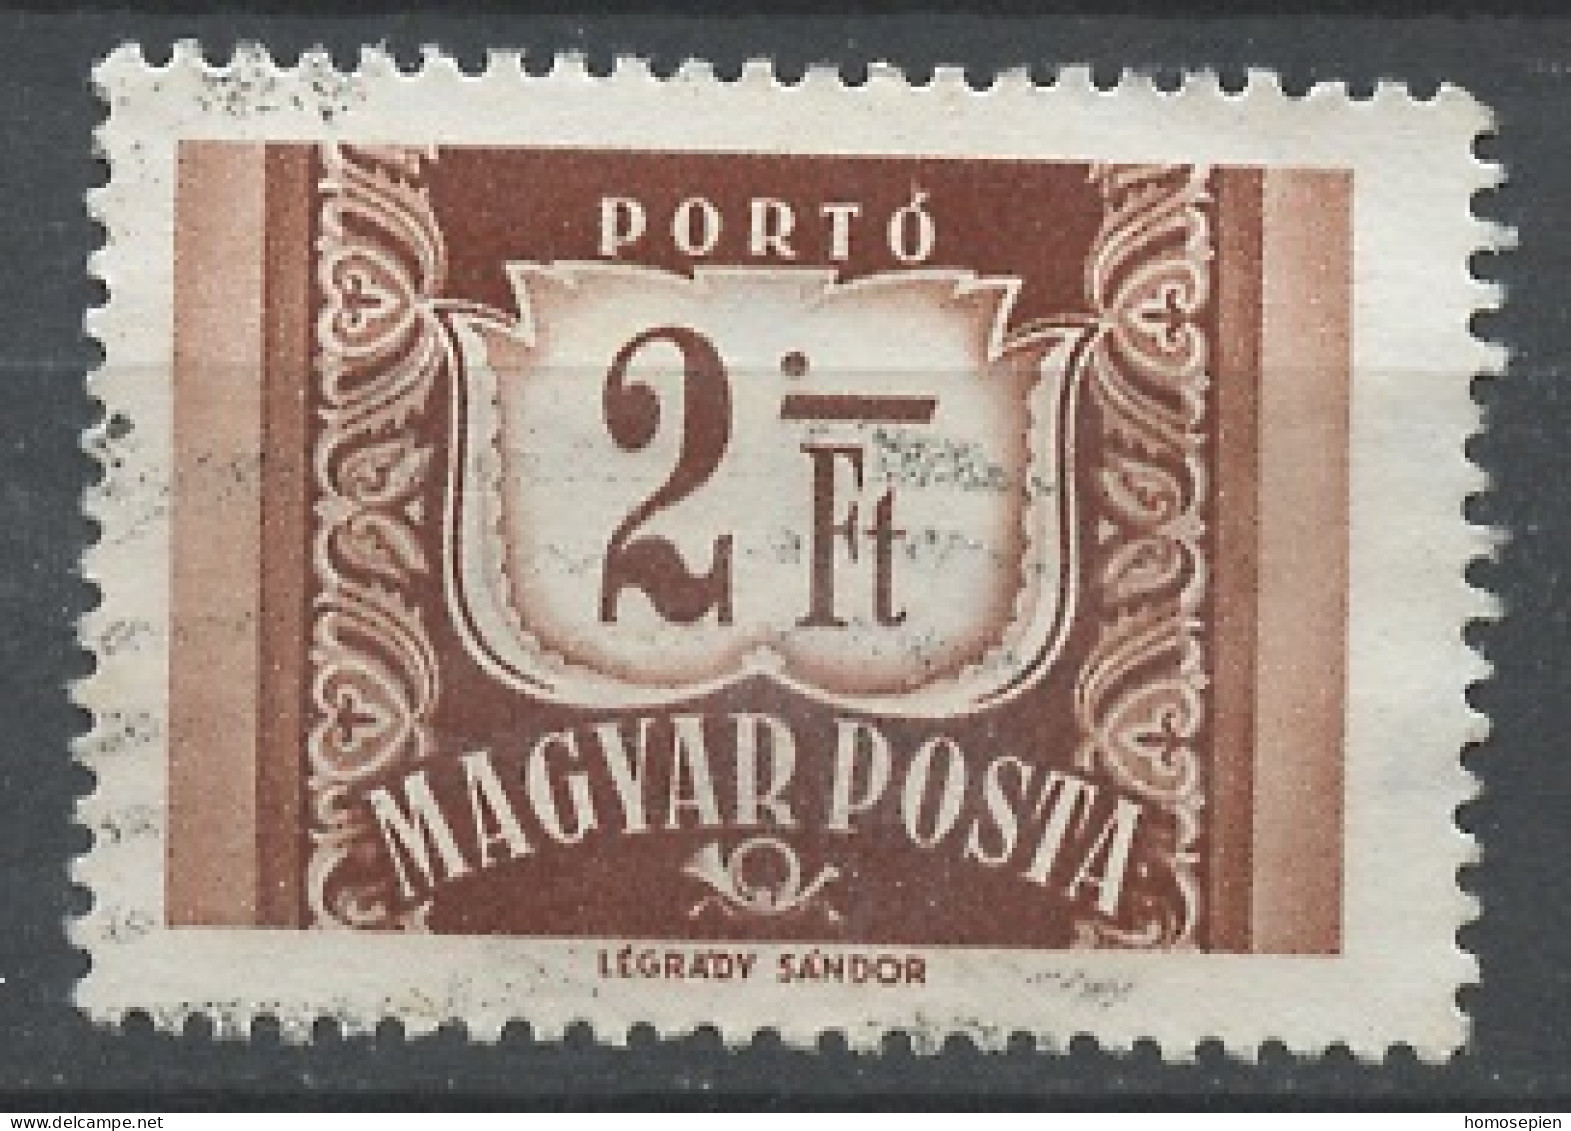 Hongrie - Hungary - Ungarn Taxe 1958-69 Y&T N°T233A - Michel N°P239 (o) - 2fo Chiffre - Port Dû (Taxe)